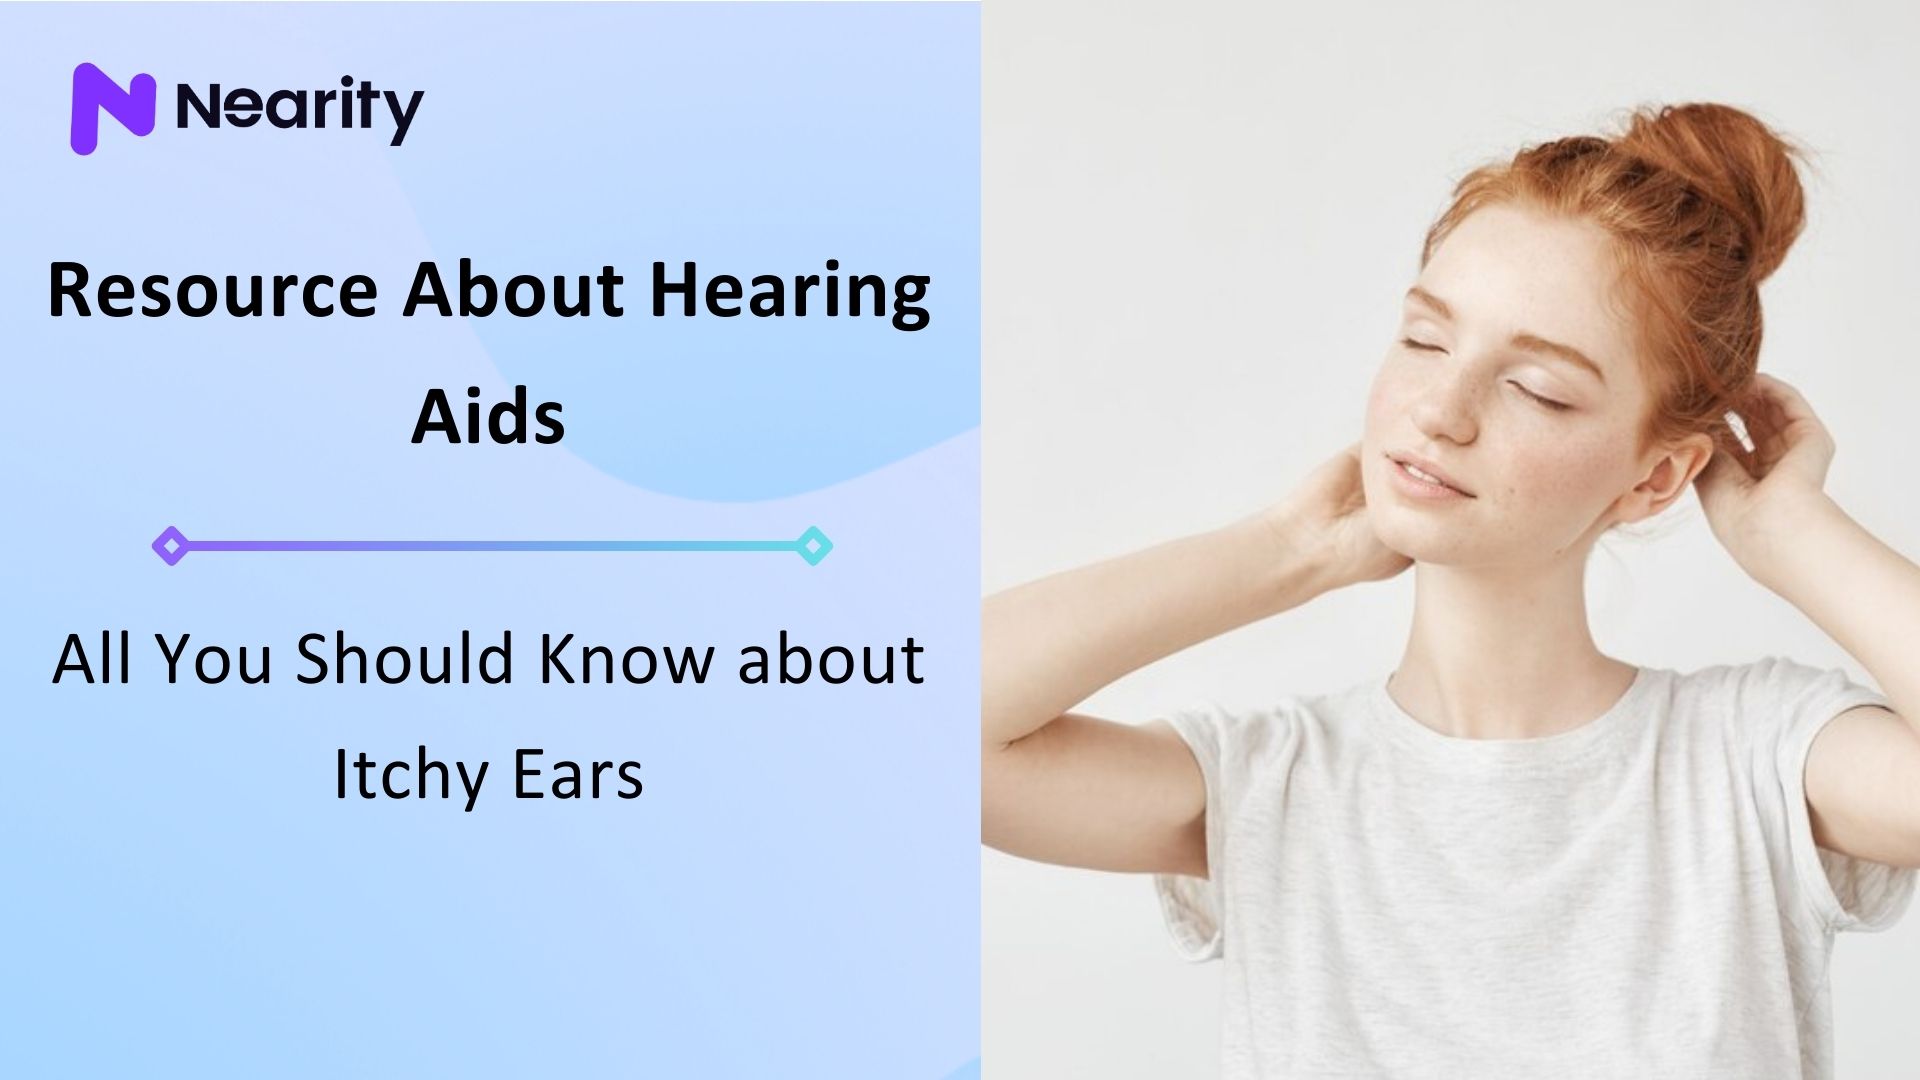 All You Should Know about Itchy Ears